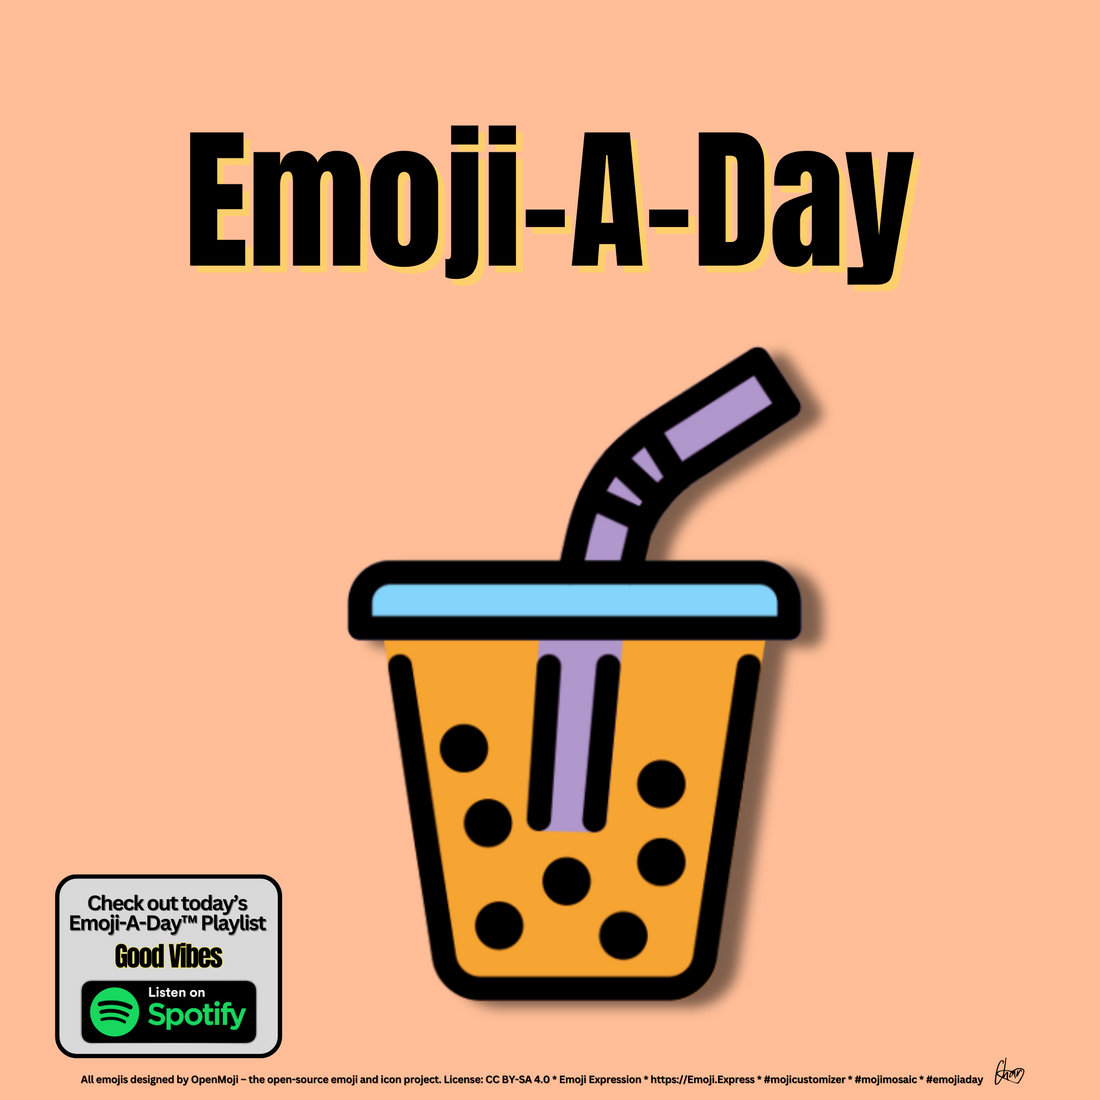 Emoij-A-Day theme with Bubble Tea emoji and Good Vibes Spotify Playlist